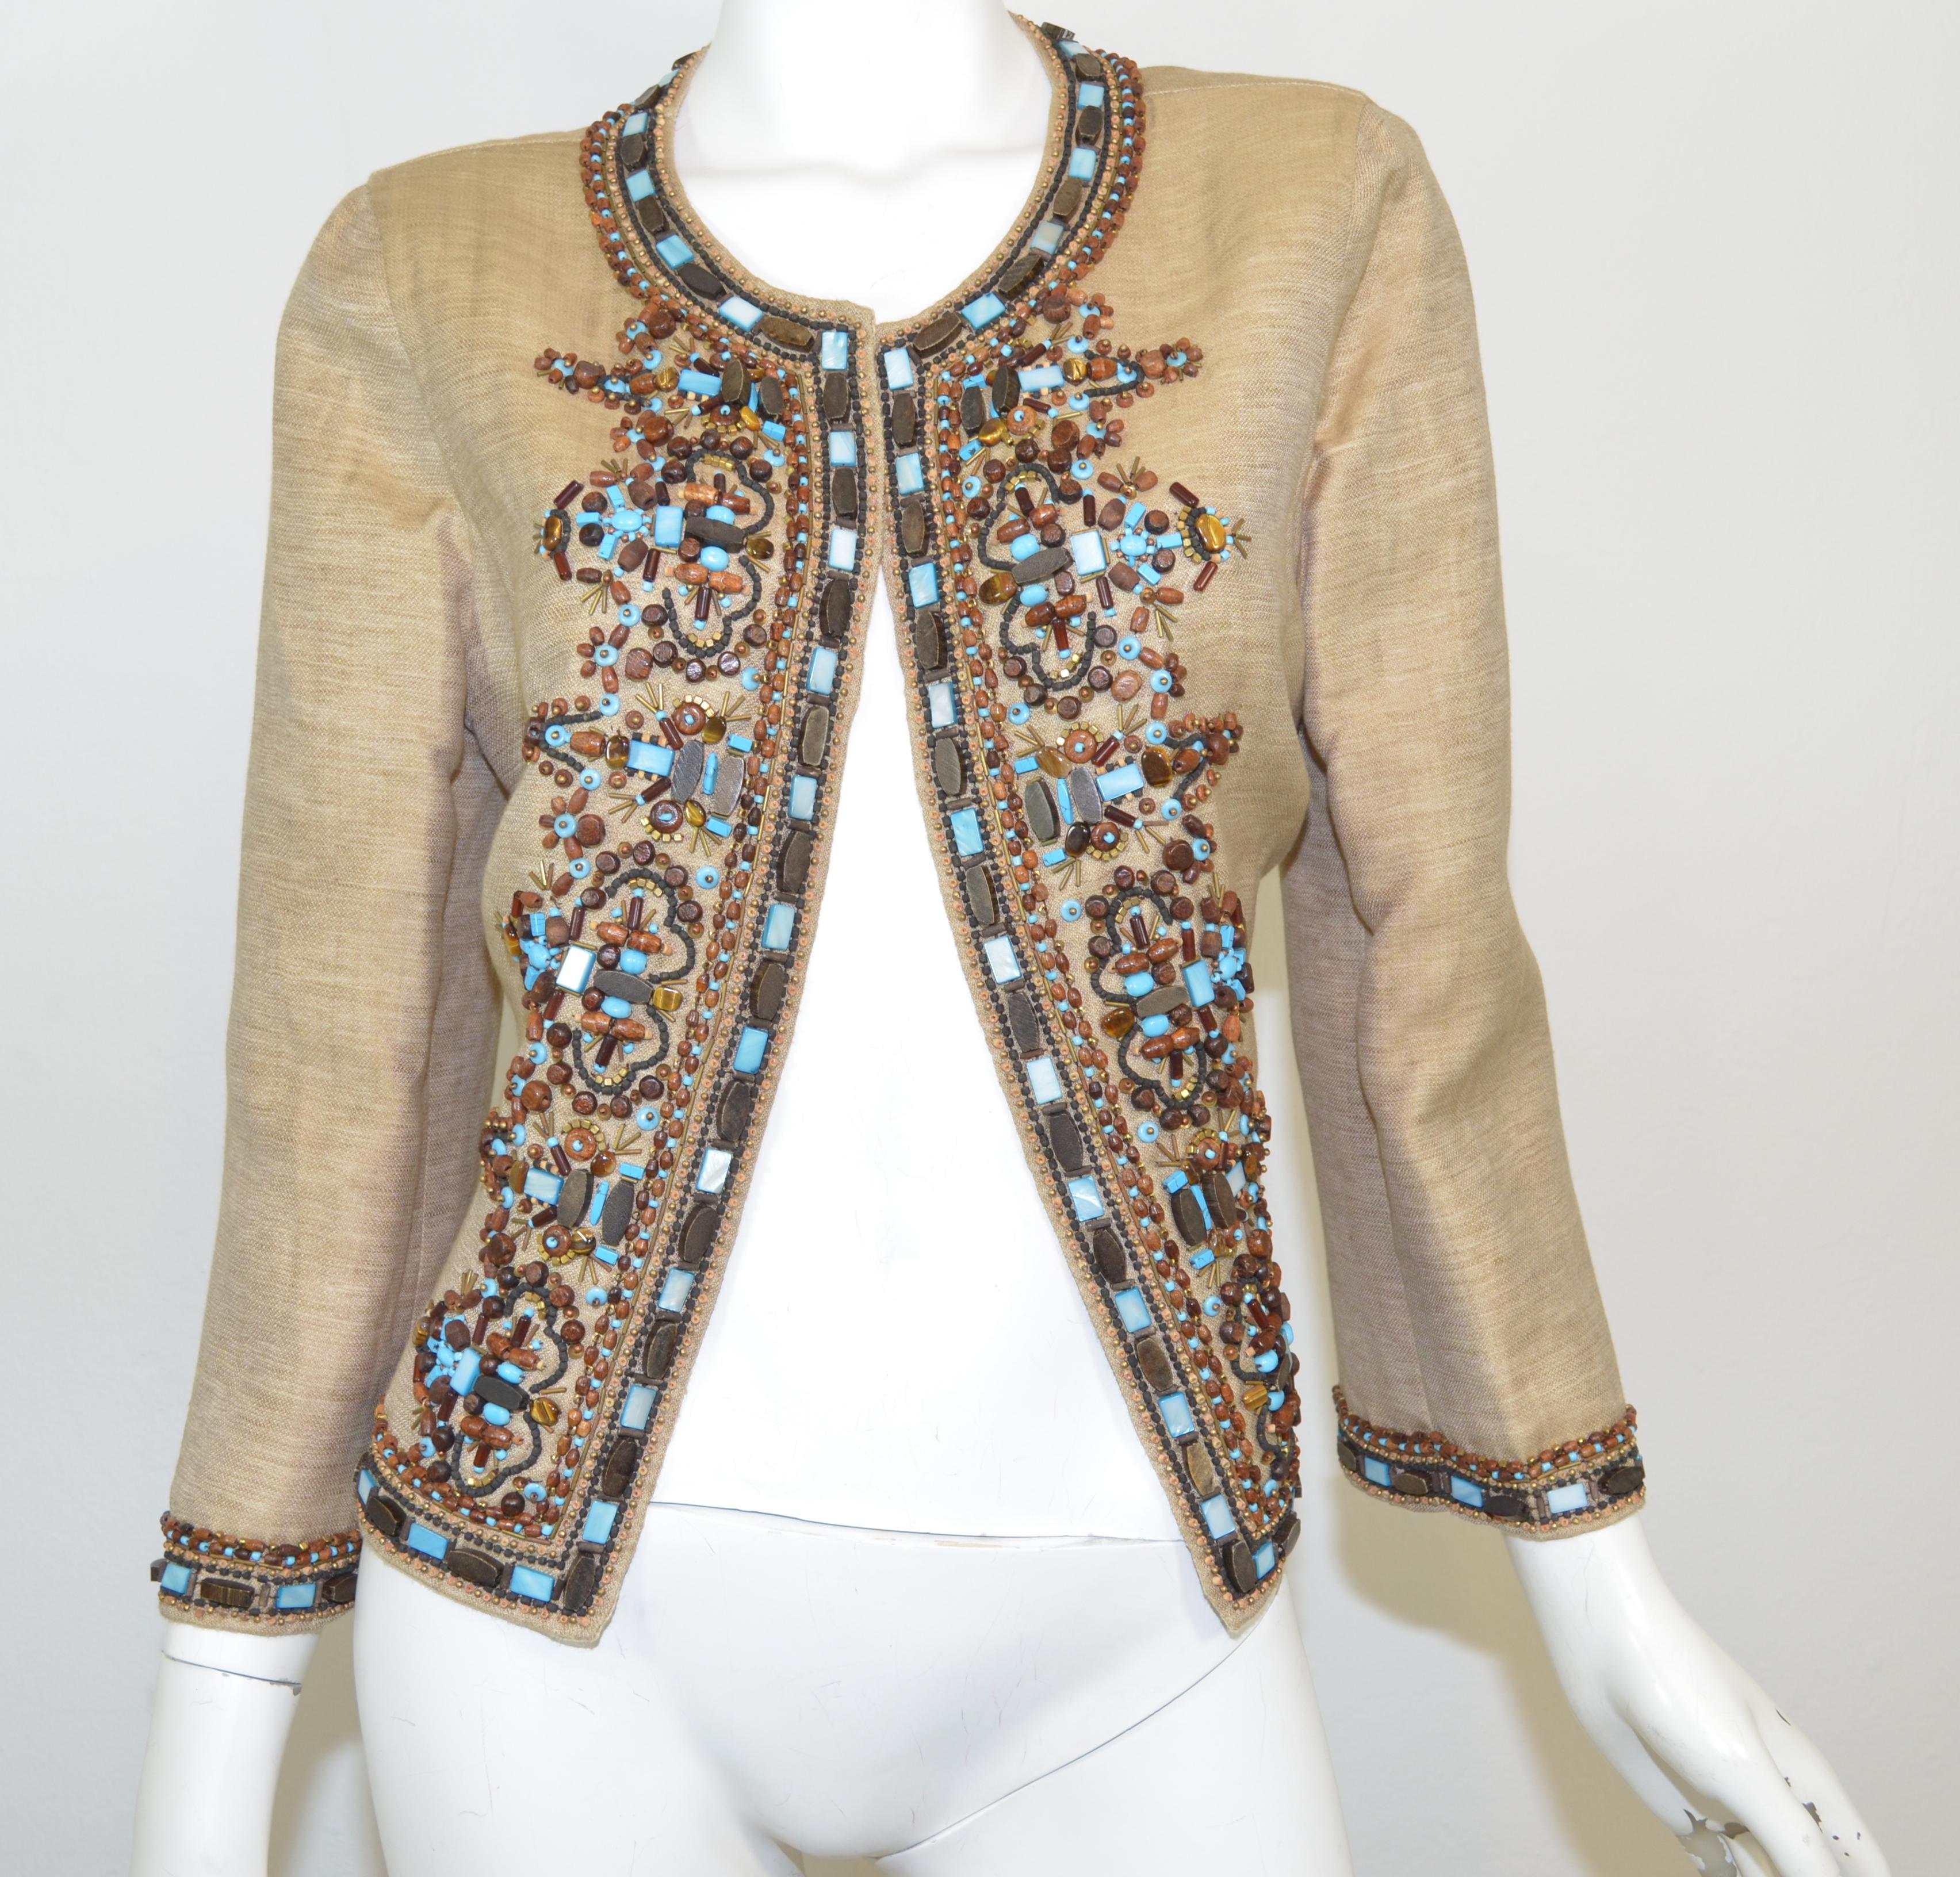 This Oscar de la Renta jacket is beautifully embellished with a mix of beads that border the jacket and cover the bust. Jacket has a single hook and eye fastening. Size 12, made in Italy.

Measurements:
Bust 40”
Sleeves 21”
Shoulder to shoulder